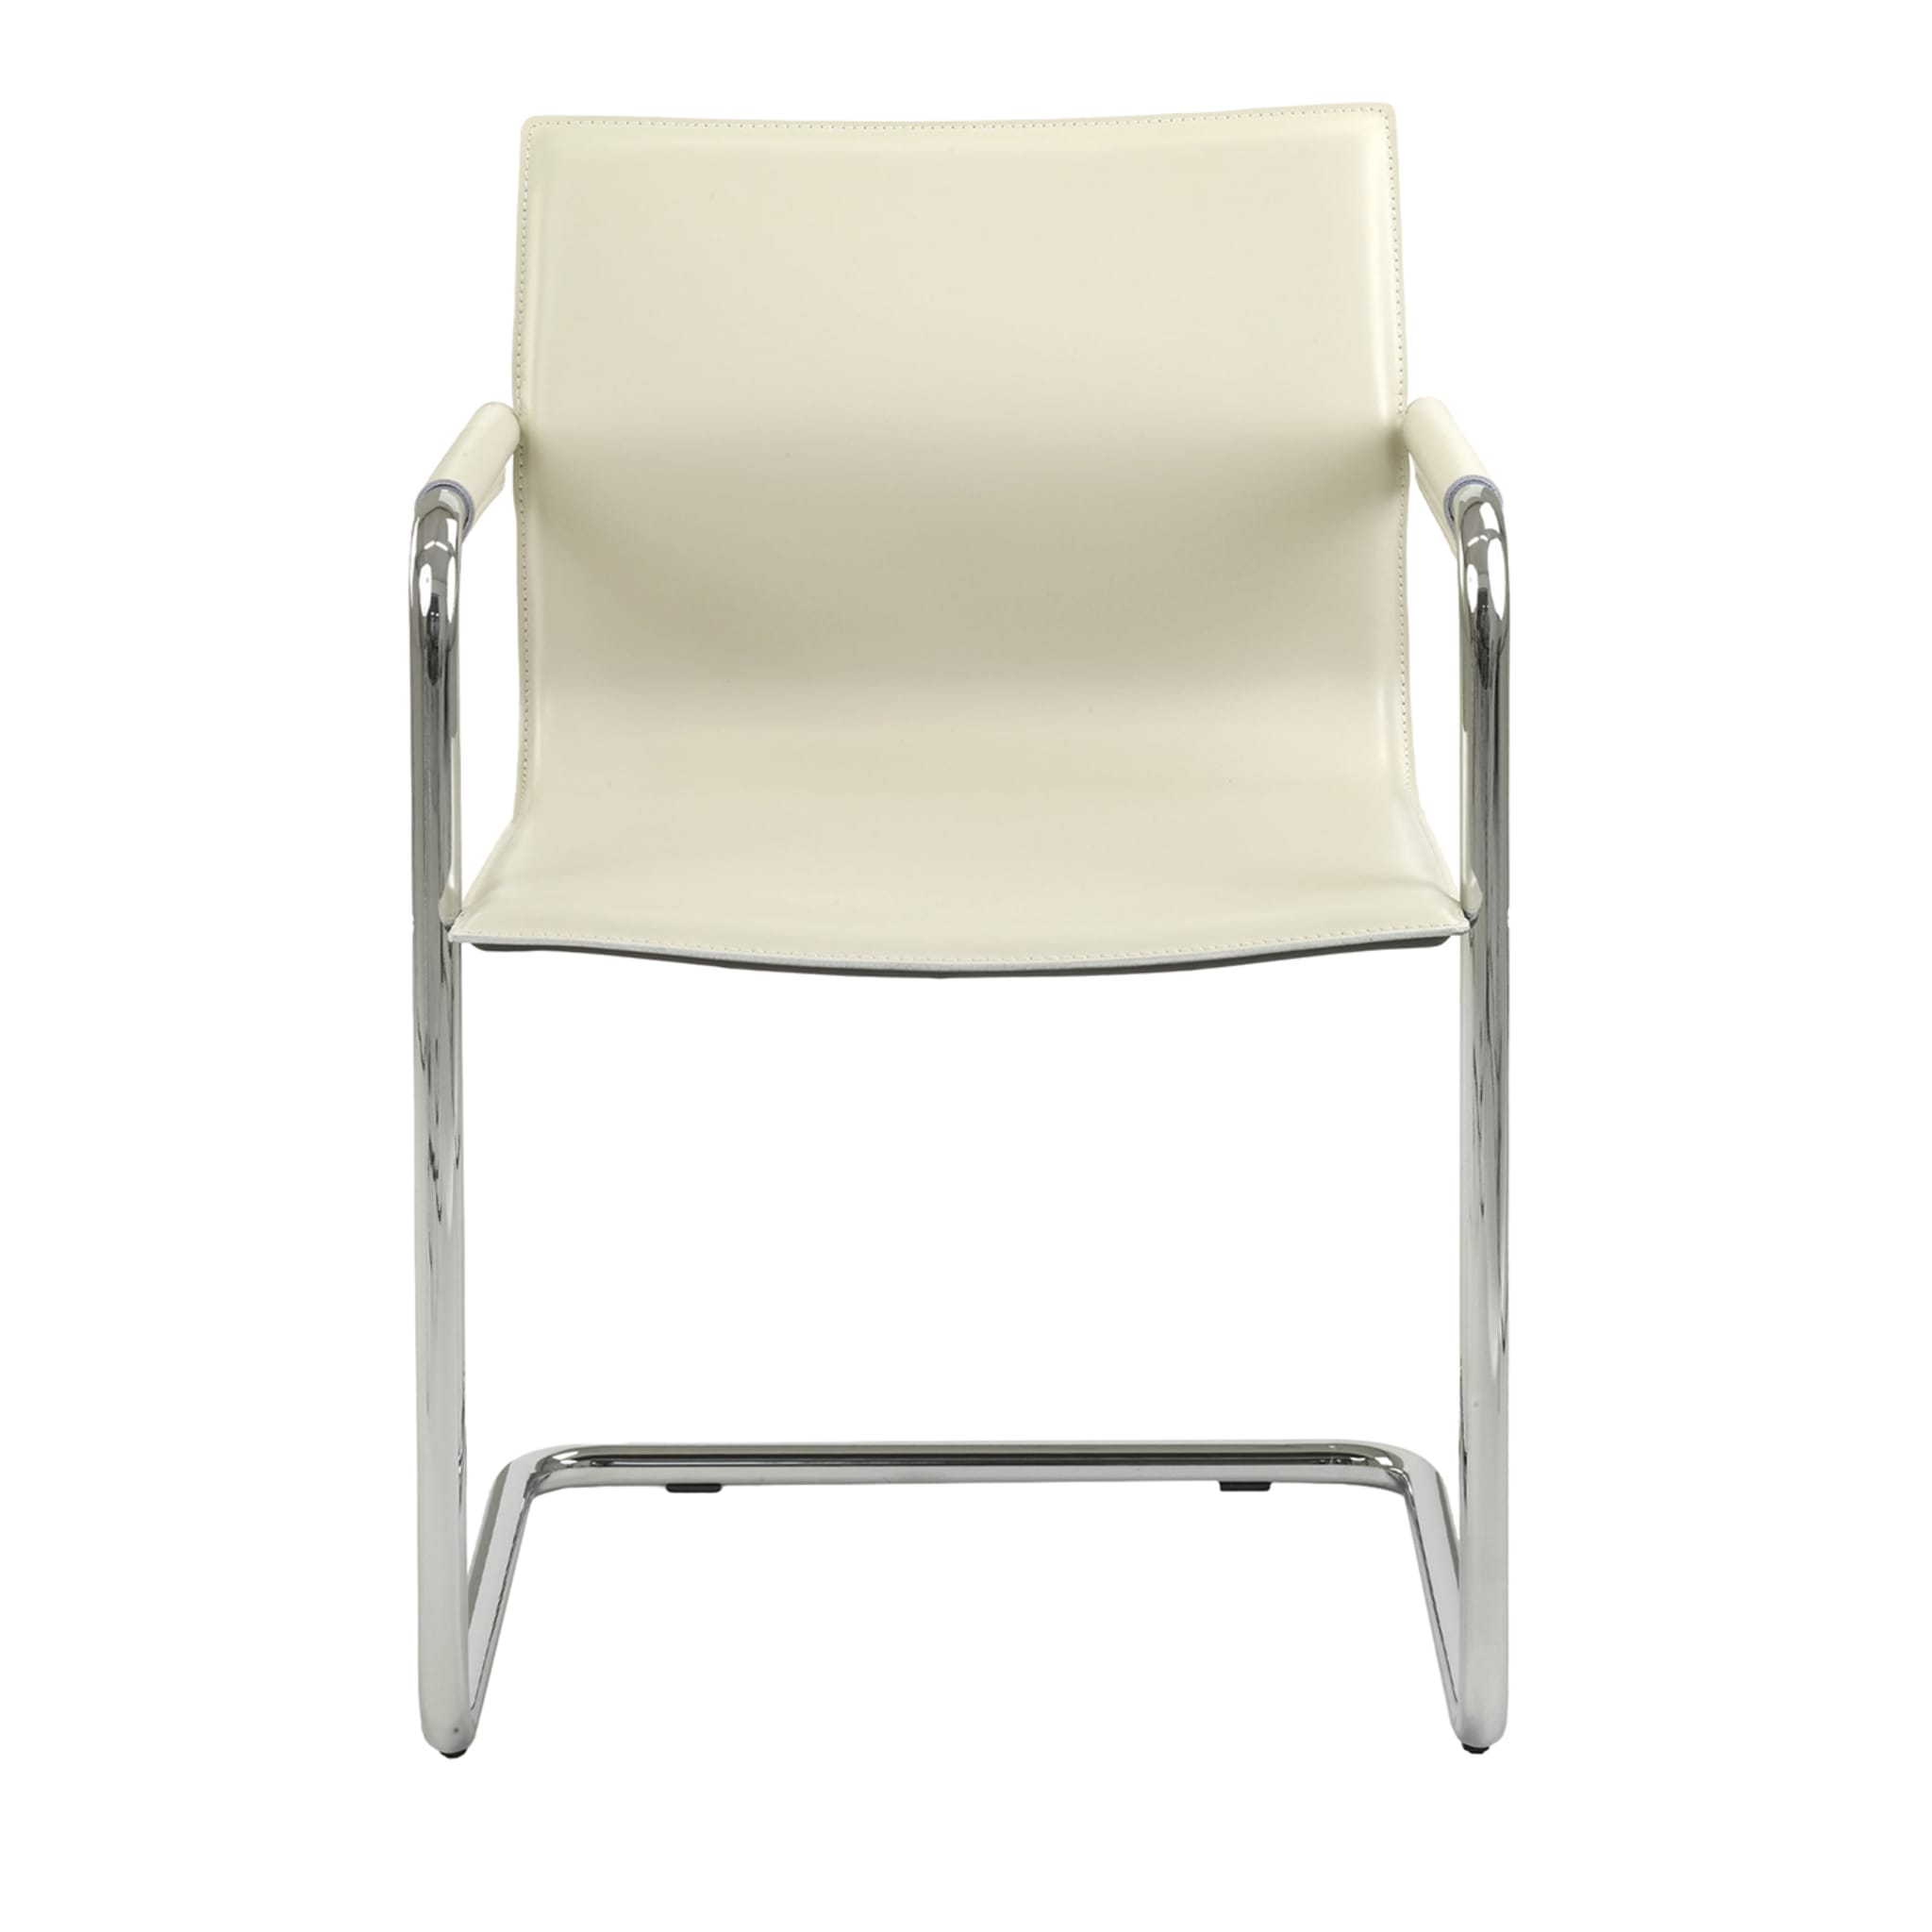  Lybra Chair With Covered Arms - Main view